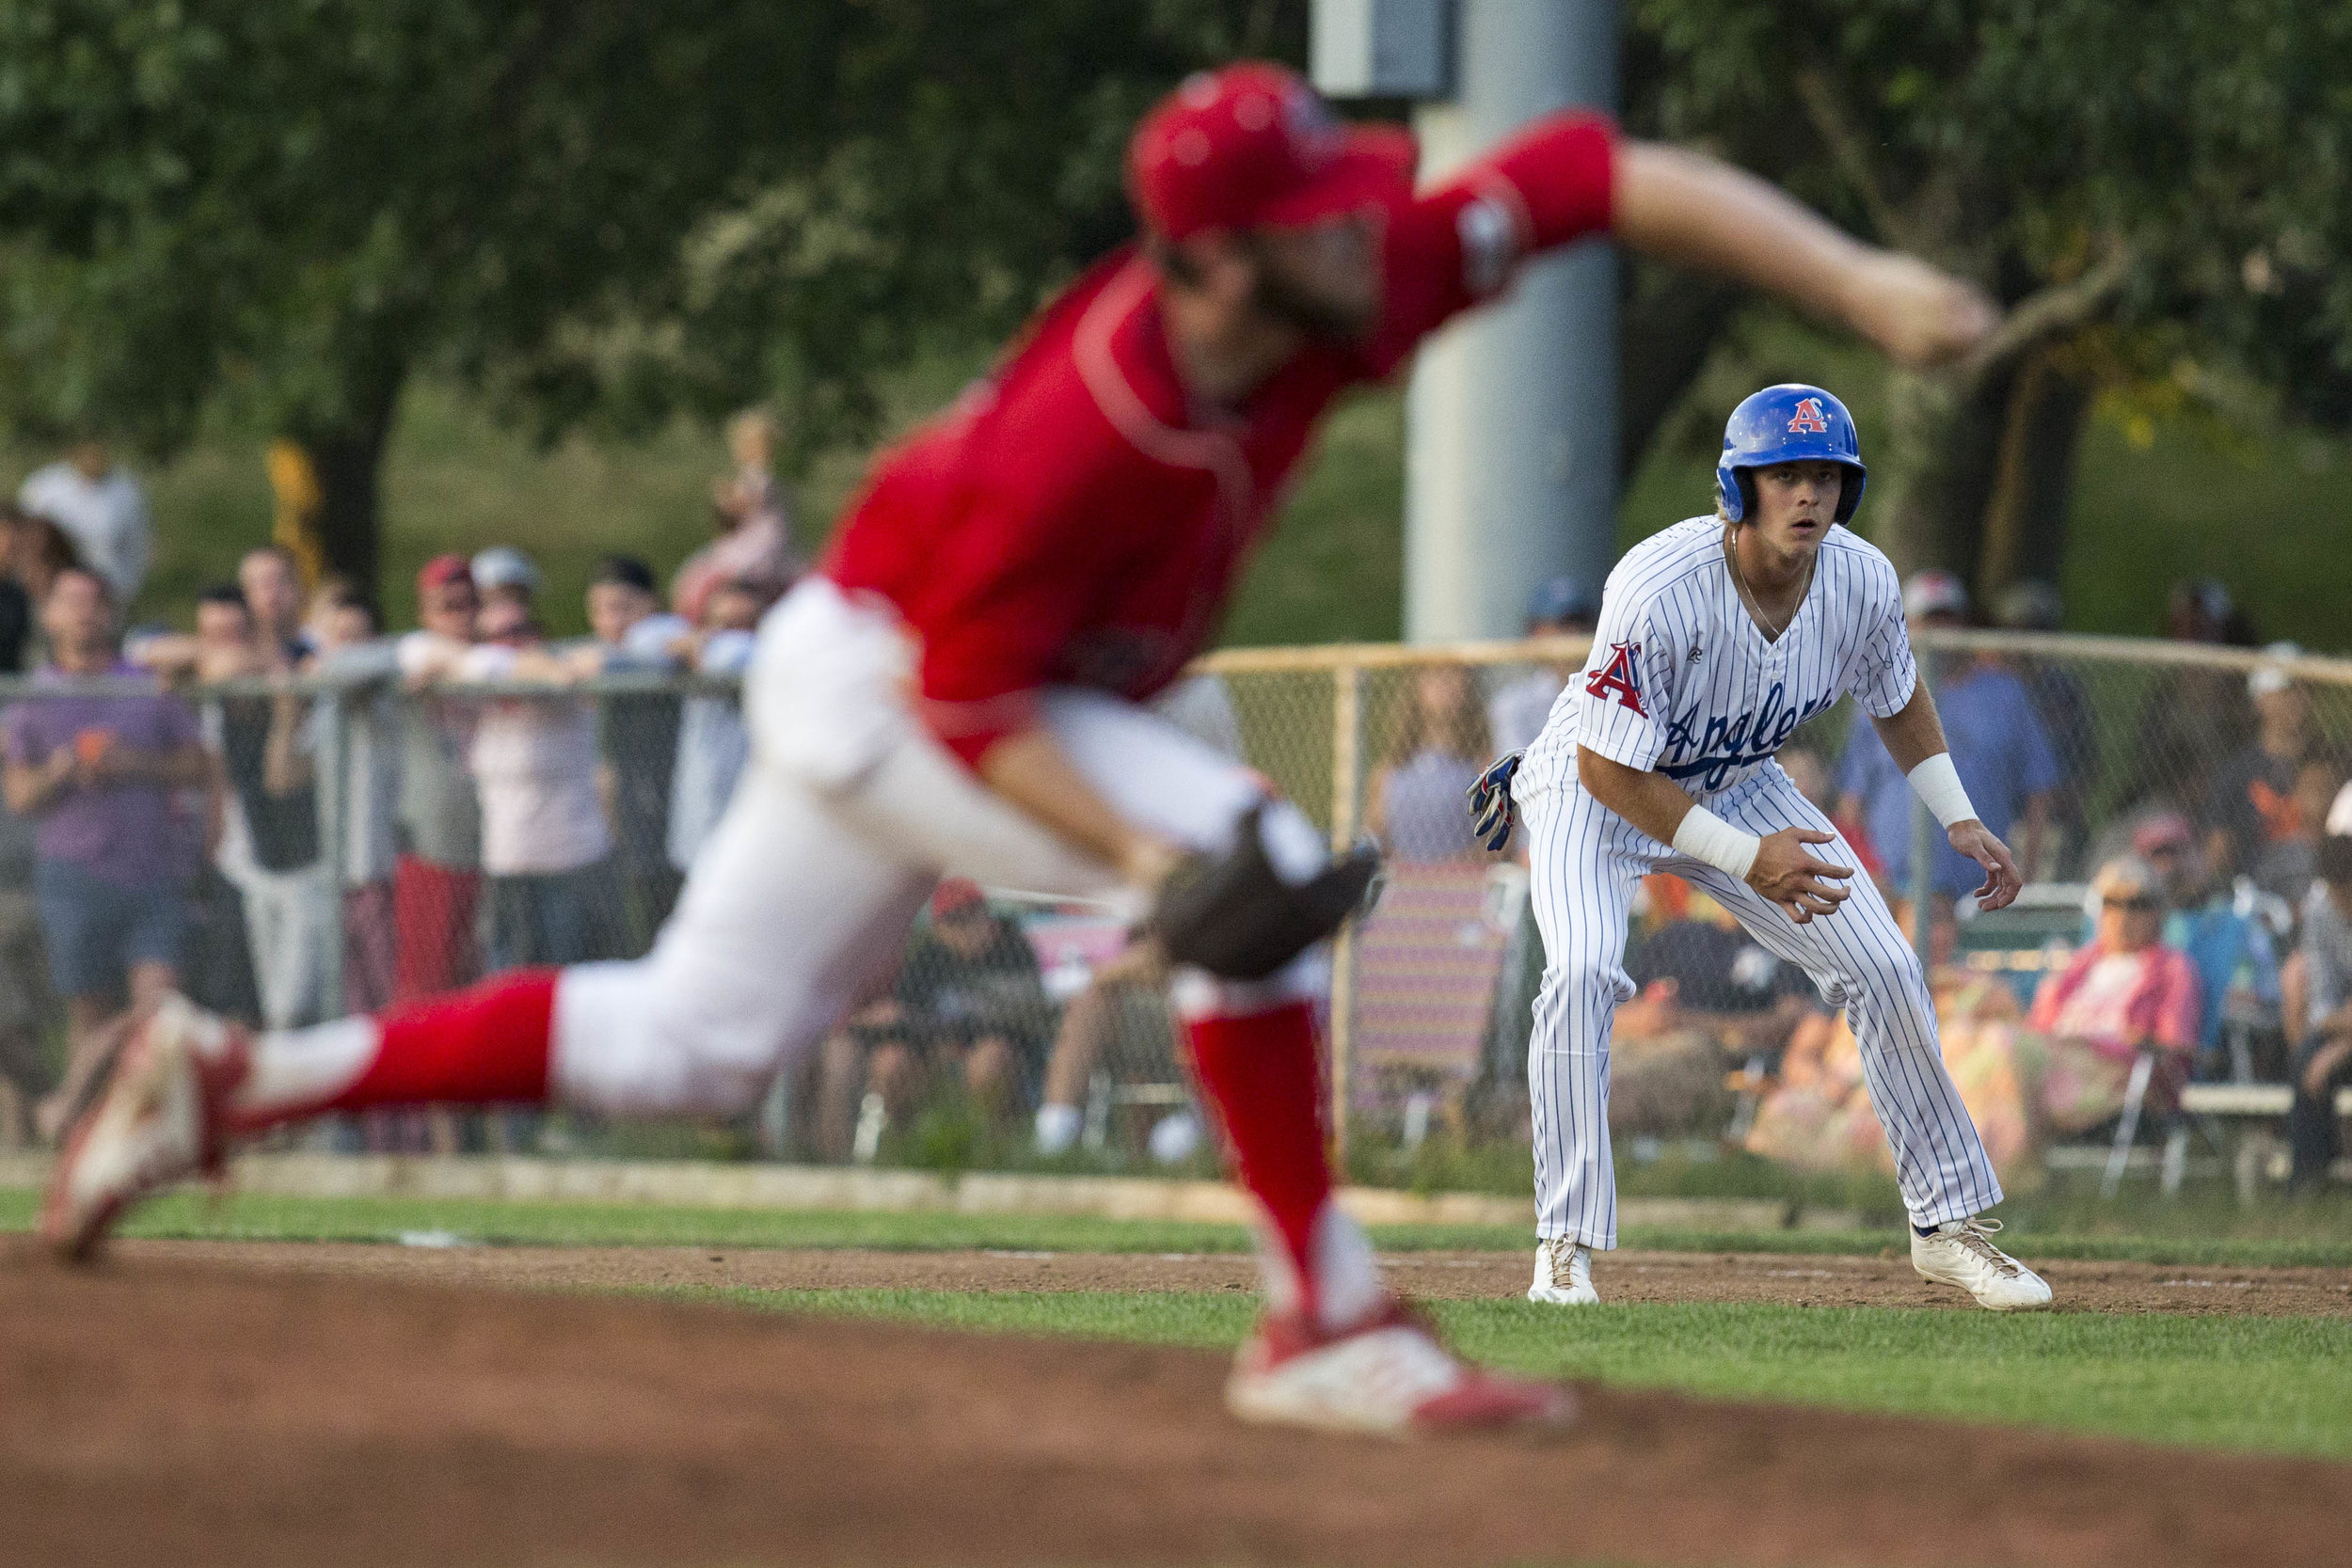  Nick Patten, of the Chatham Anglers, leads off of first base while Hogan Harris, of the Yarmouth-Dennis Red Sox, pitches to Josh Stowers, of the Chatham Anglers, during Chatham's home game against Y-D on July 3, 2017. 